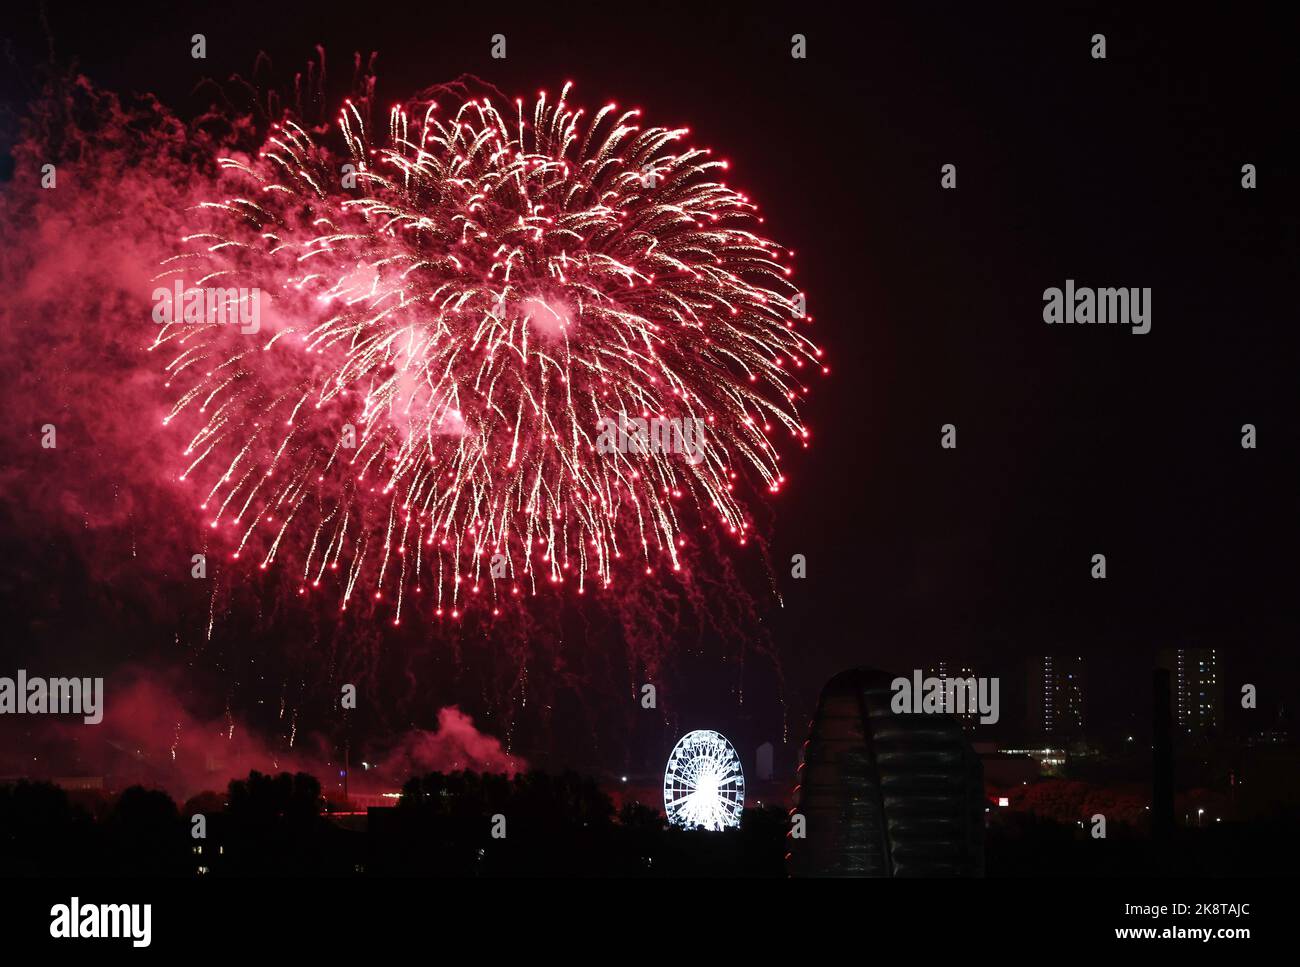 Leicester, Leicestershire, UK. 24th October 2022. Fireworks explode behind the Wheel of Light during Diwali celebrations on the Golden Mile. LeicesterÔs celebration of Diwali is one of the biggest outside of India. Credit Darren Staples/Alamy Live News. Stock Photo